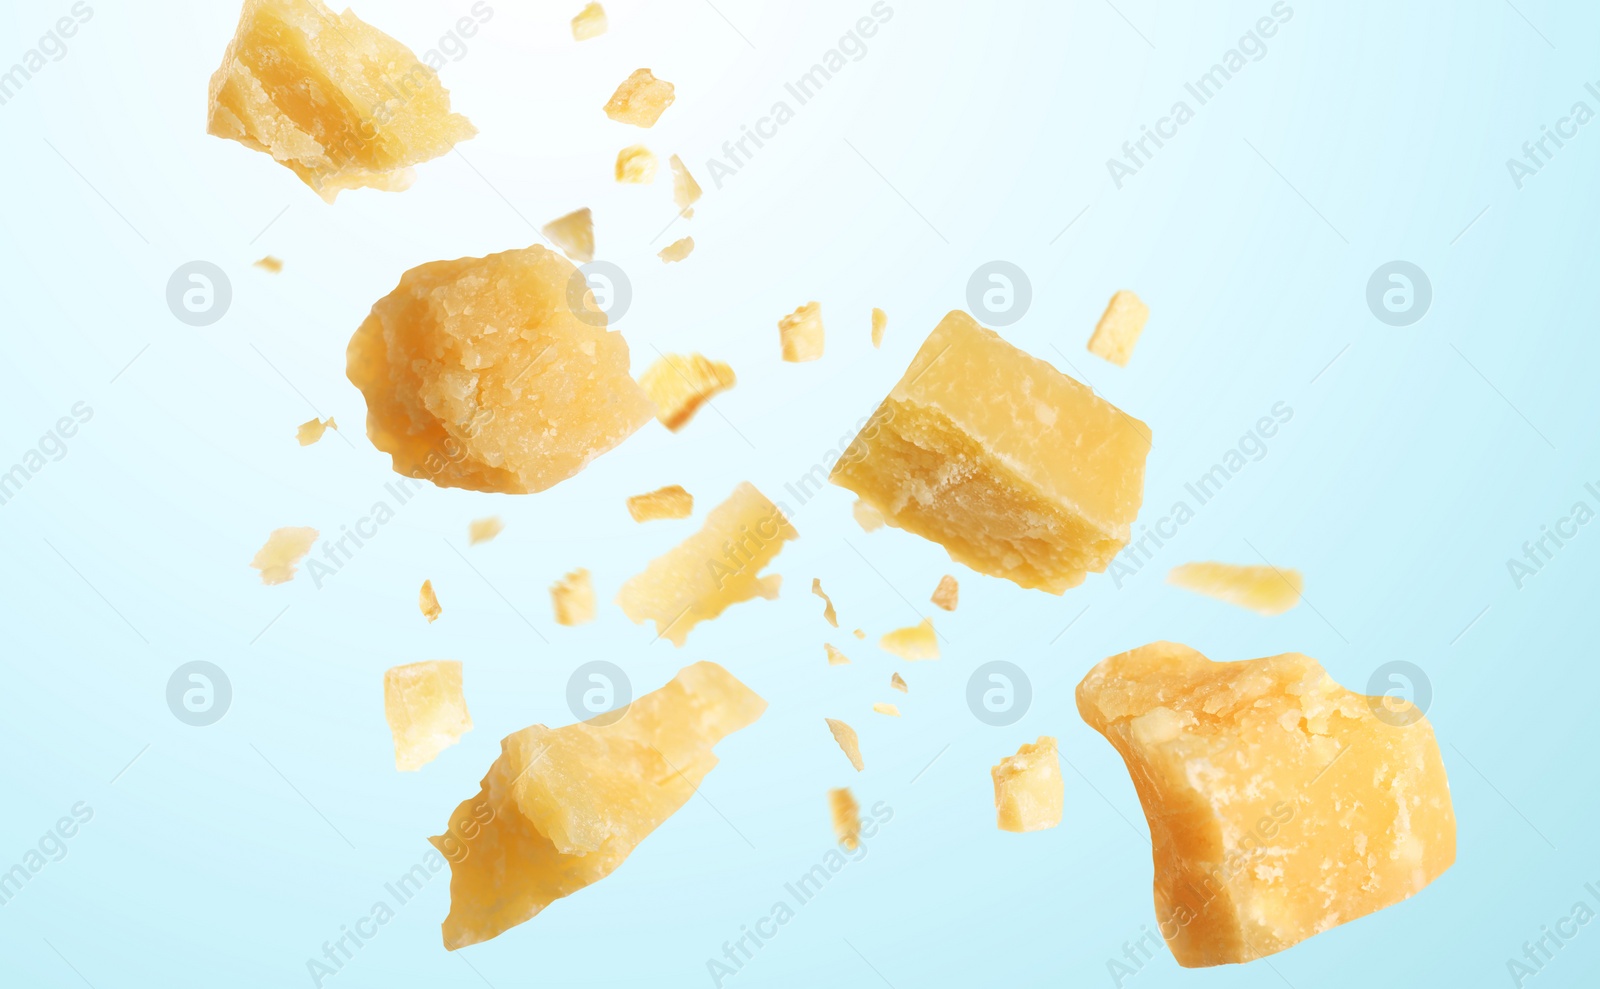 Image of Pieces of delicious parmesan cheese flying on light background